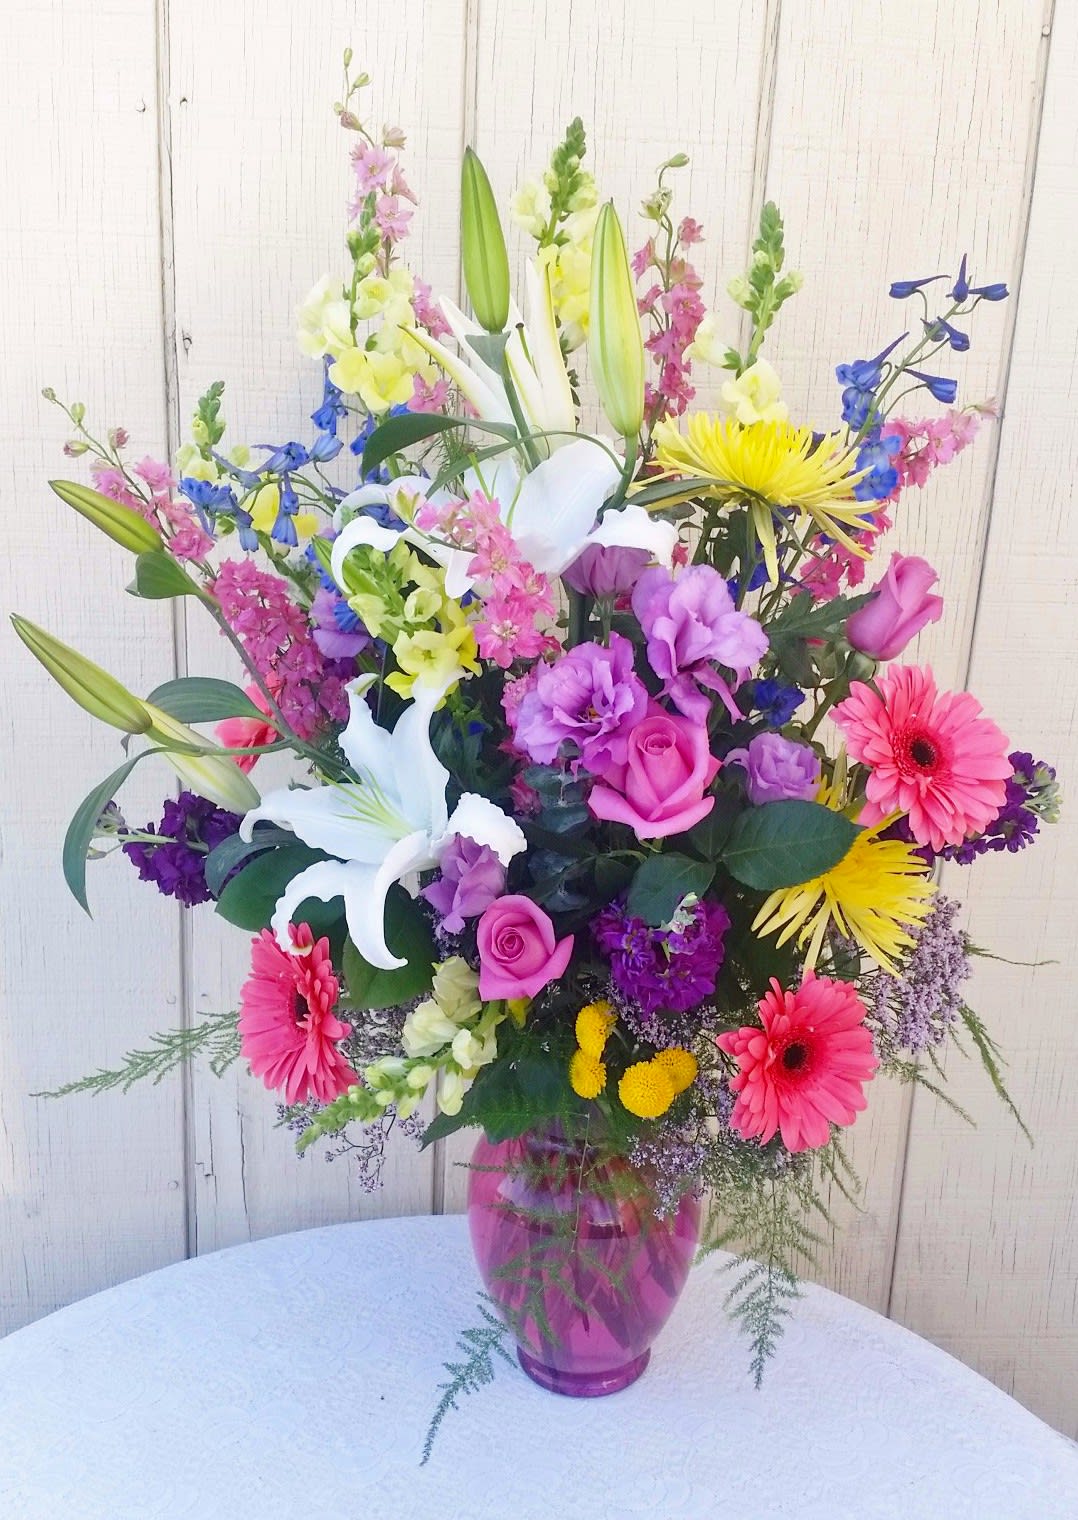 Endless Love bouquet - Beautiful blend of Gerberas, Lilies, Roses, Lisianthus, Delphinium, larkspur, snapdragons and chrysanthemums arranged in a pink glass vase. This arrangement is 24&quot;h X 18-20&quot;w. 